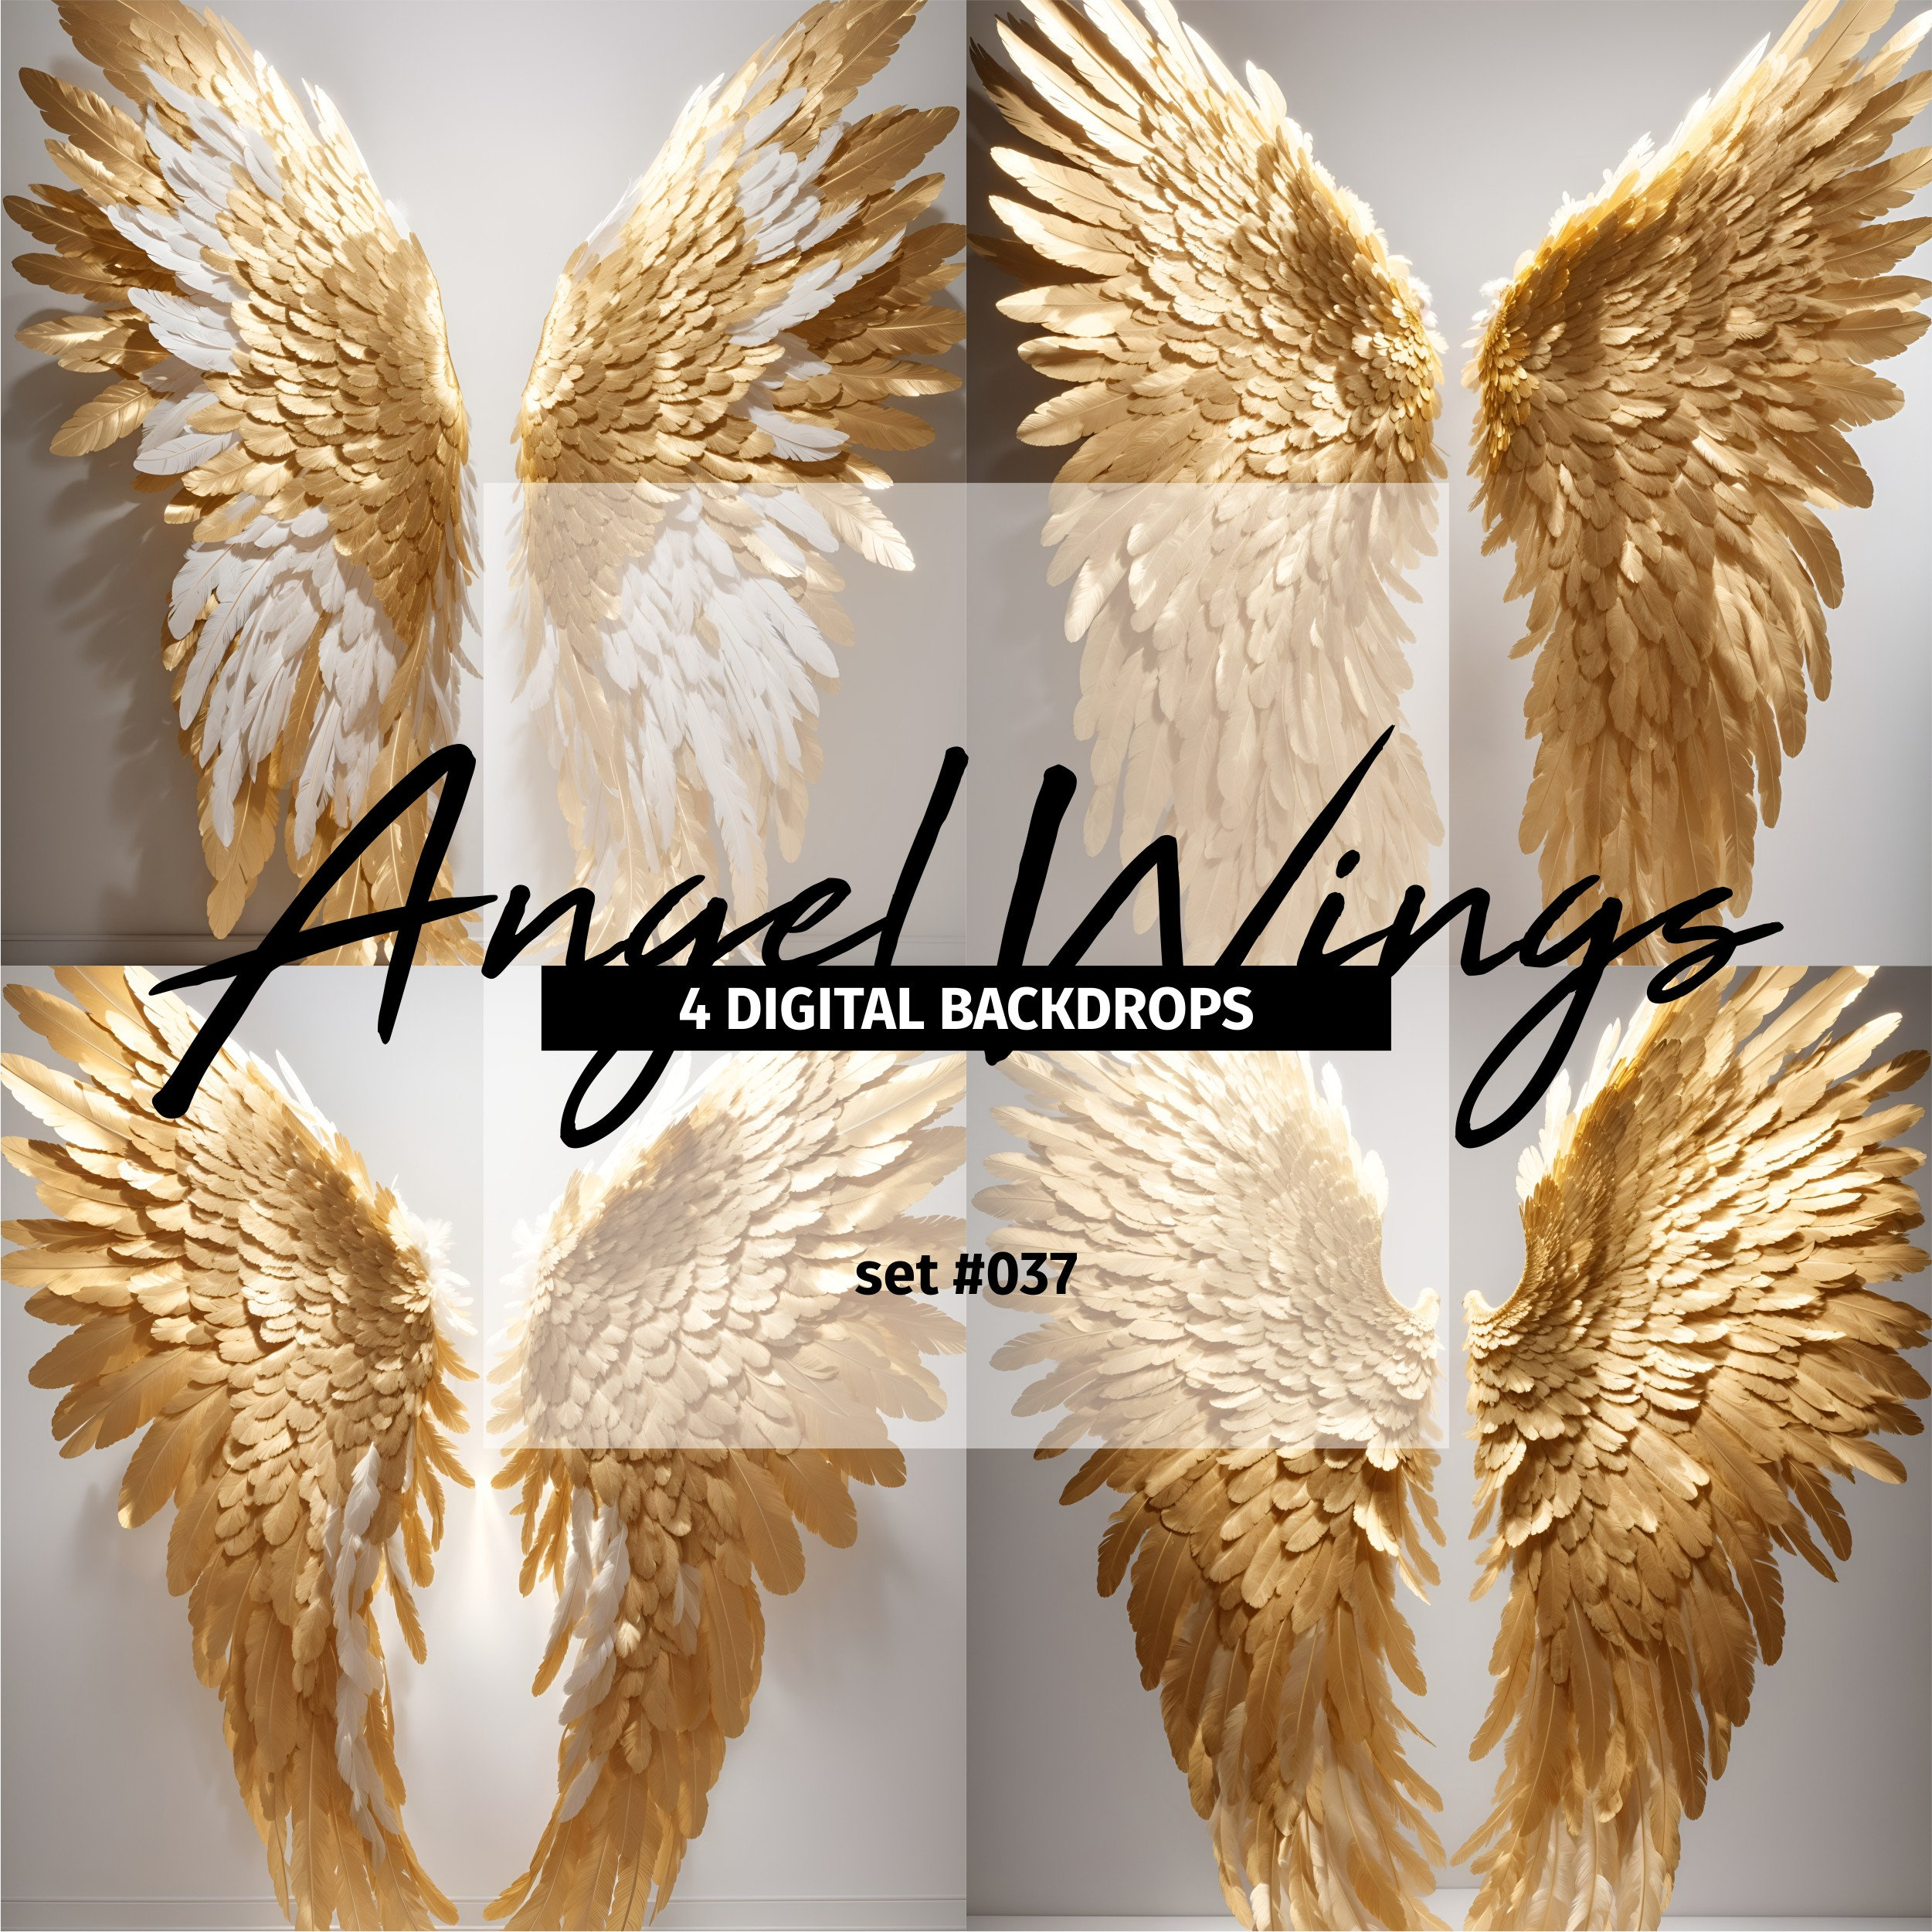 Premium Photo  A gold angel wings on a white background